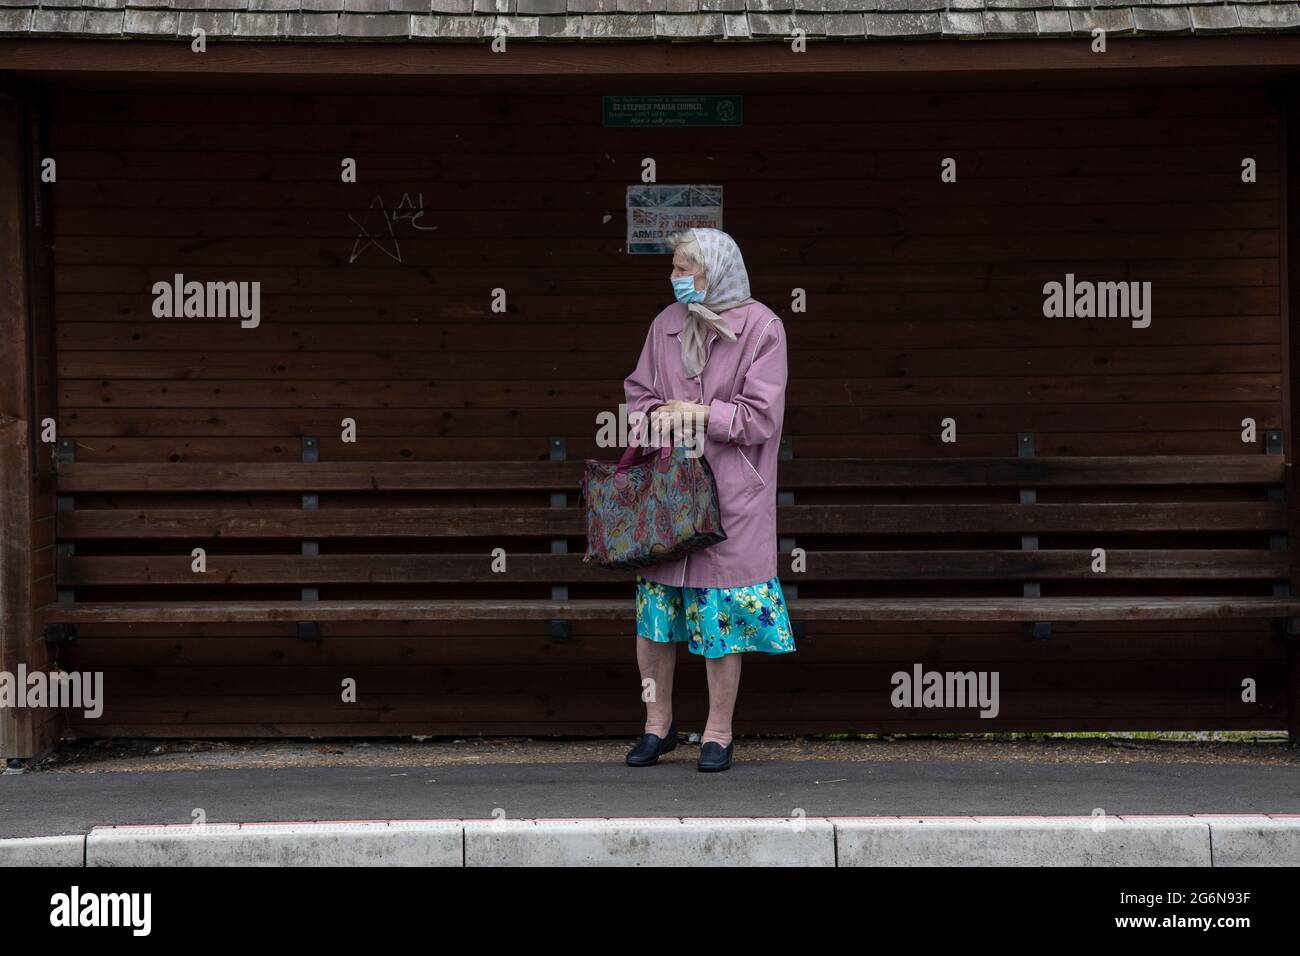 An elderly lady stood at a bus stop waiting for the next bus to arrive on a blustery day, England, United Kingdom, UK Stock Photo